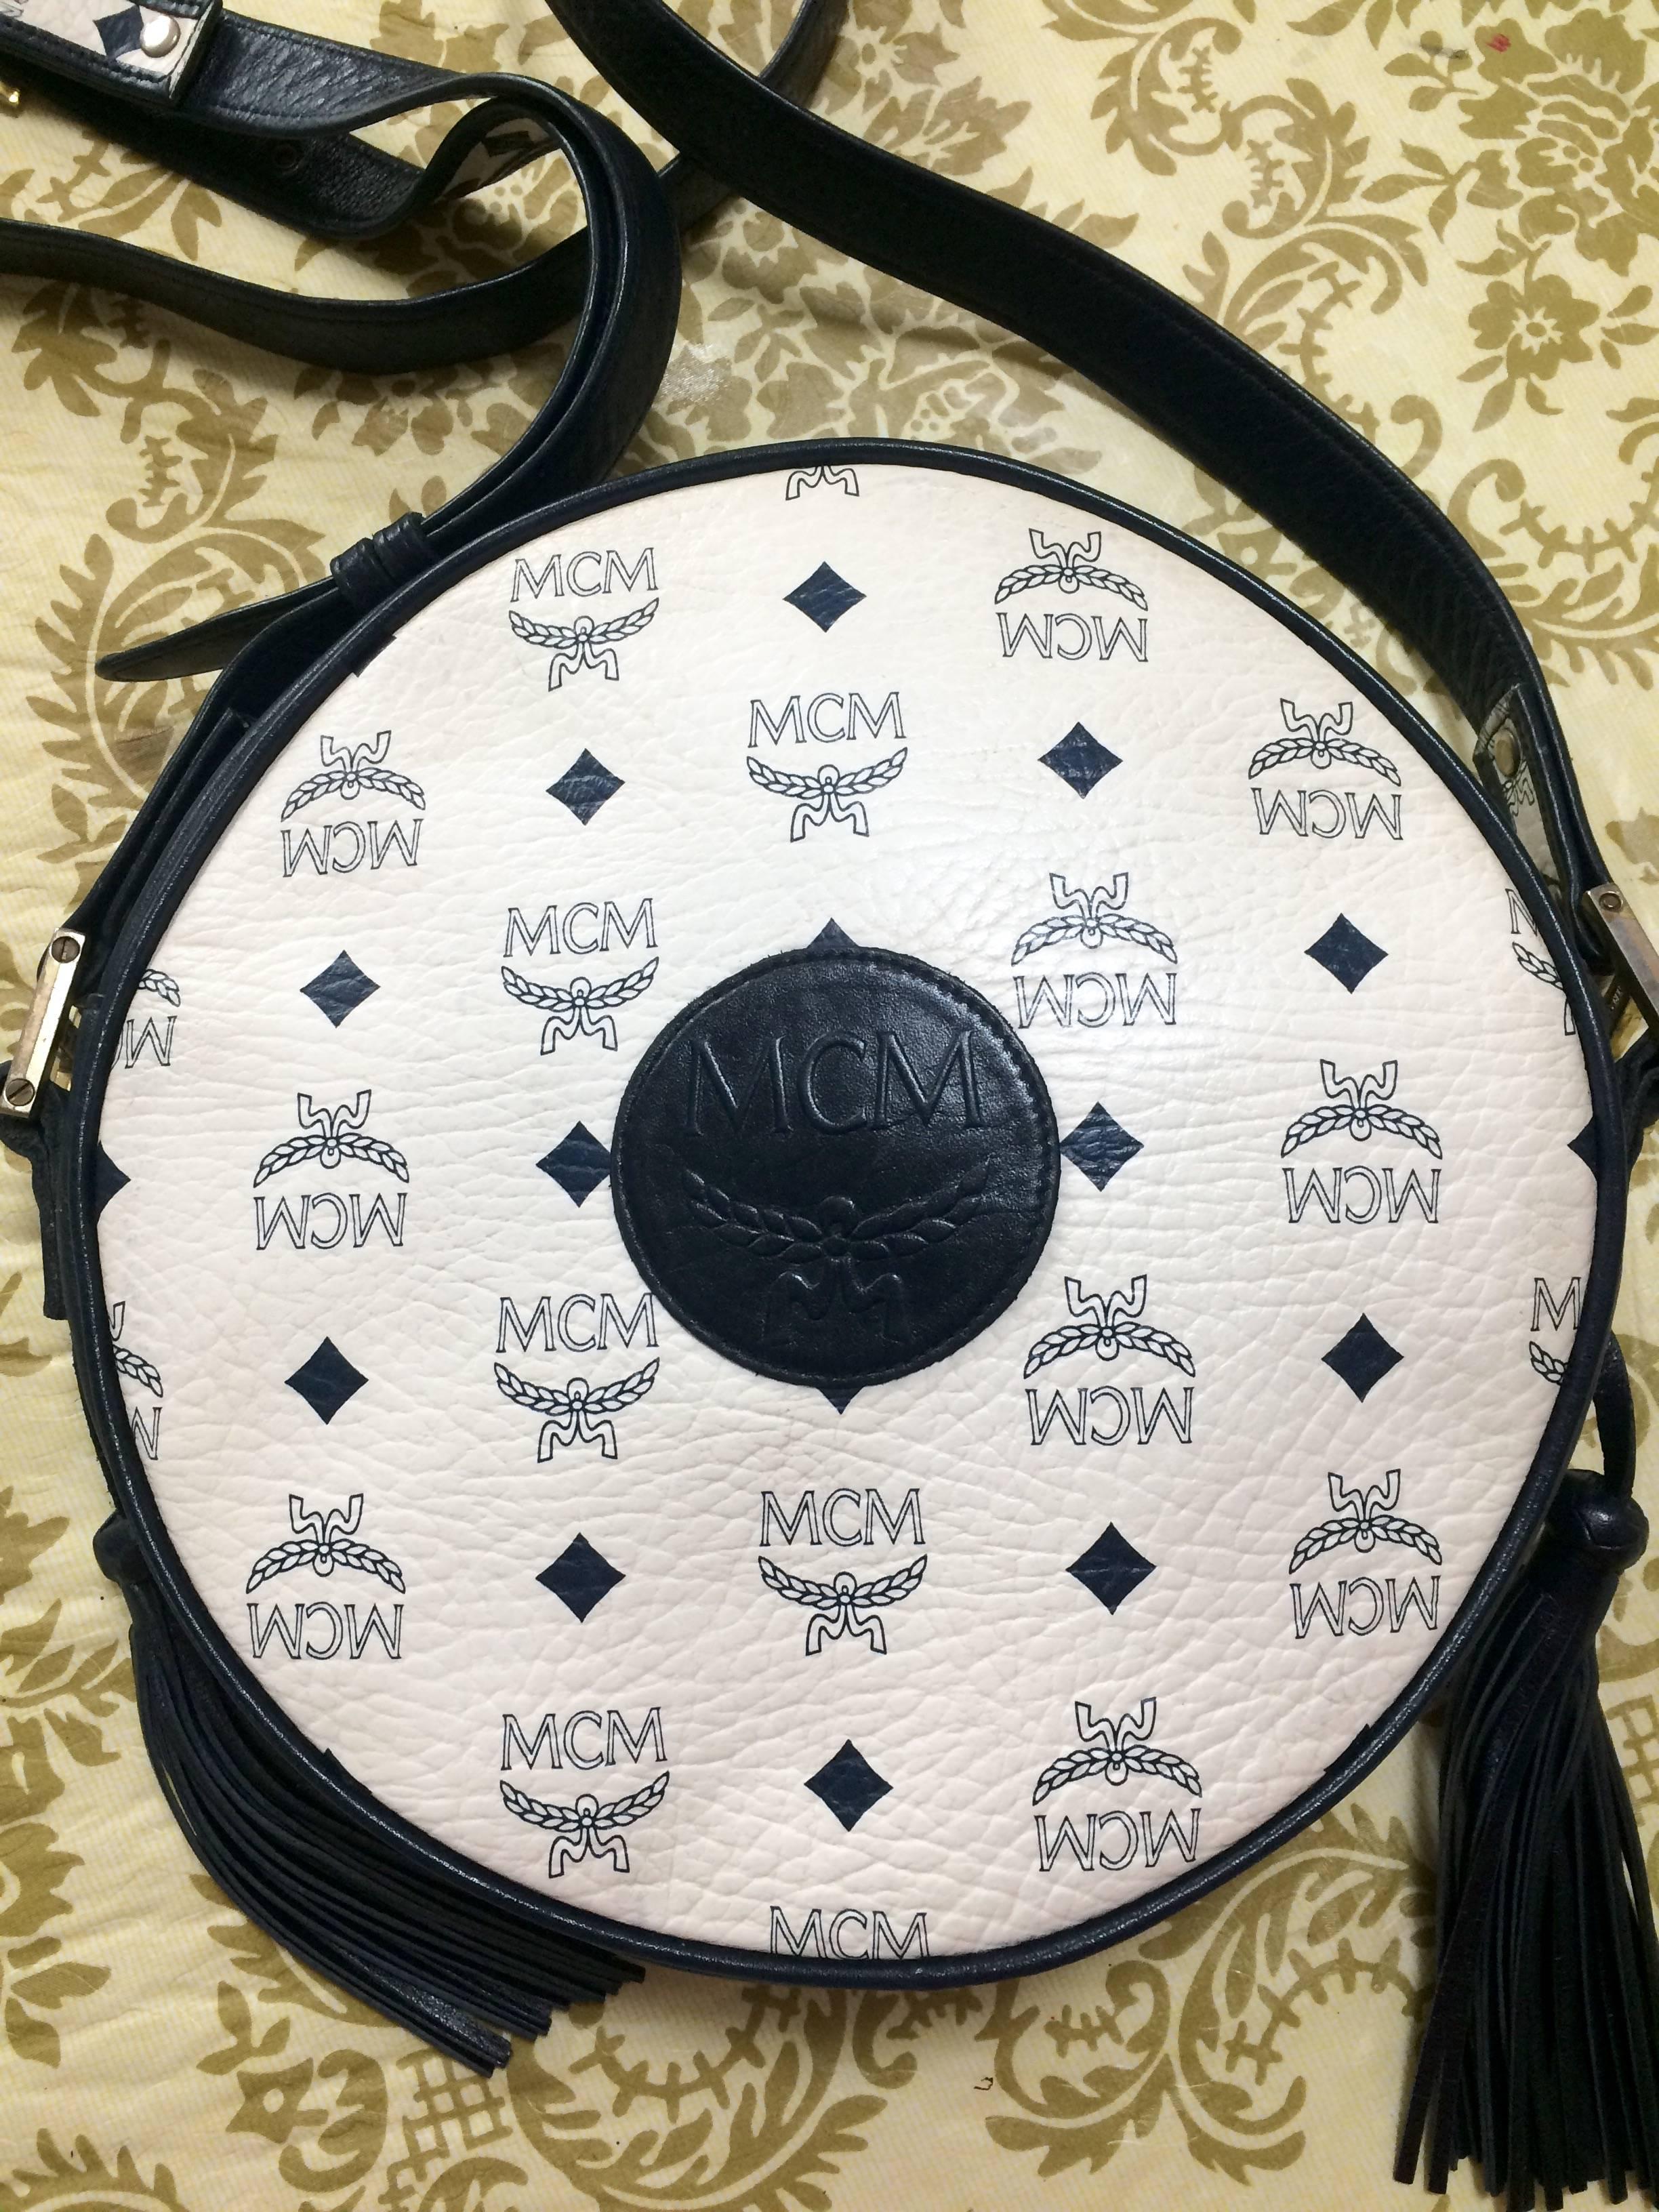 1980s. Vintage MCM navy and white monogram round shape Suzy Wong shoulder bag with leather trimmings. Unisex purse Designed by Michael Cromer.

MCM has been back in the fashion trend again!!
Now it's considered to be one of the must-have designer in